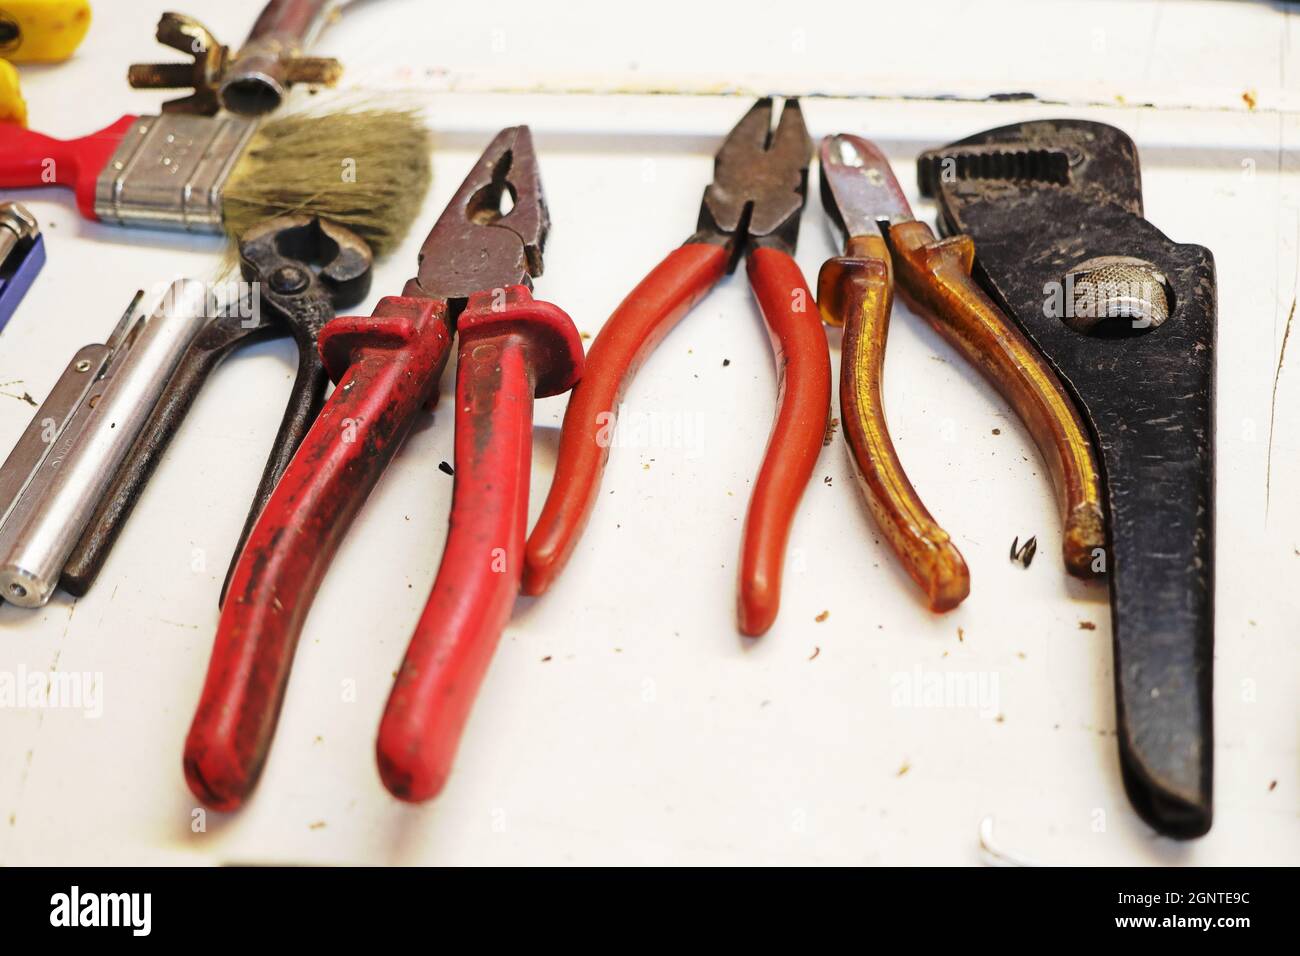 Limassol - Cyprus - September 20, 2021: Colourful tools laid out on white background Stock Photo